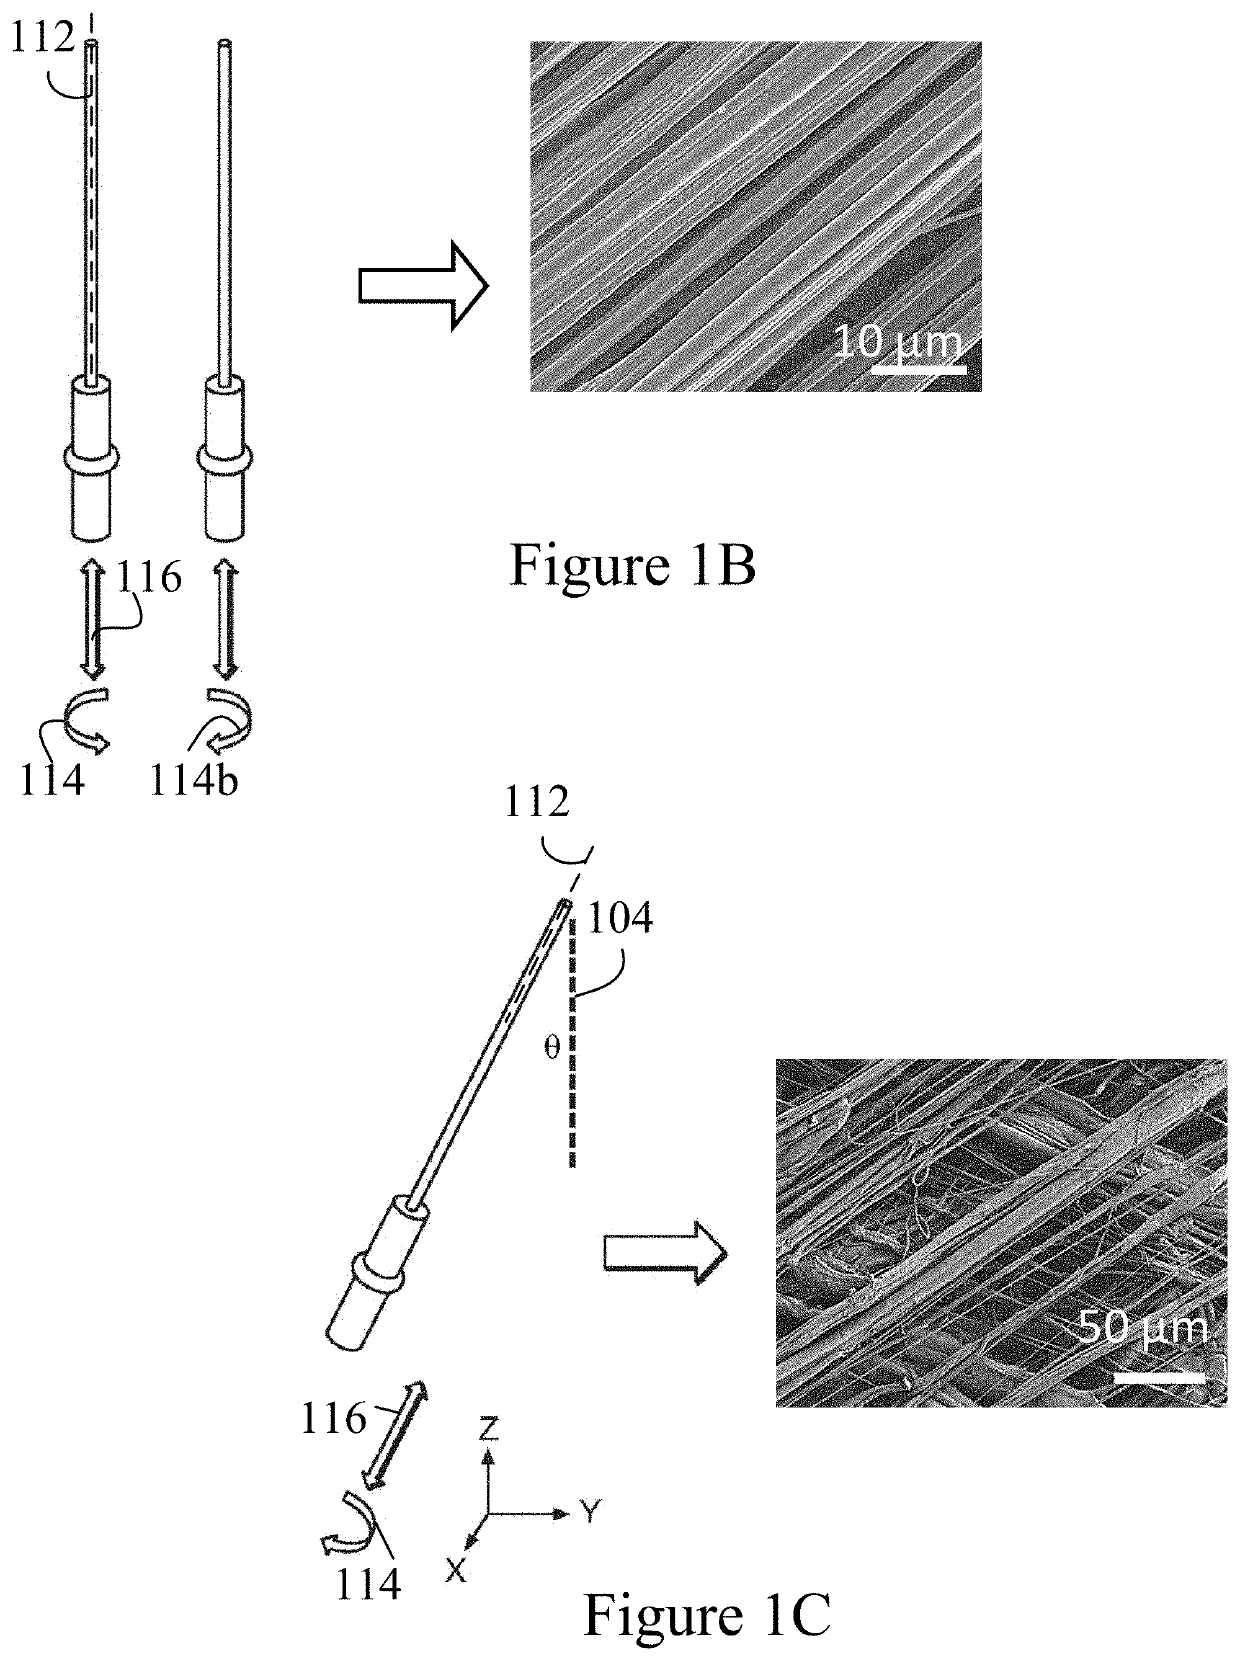 Engineered polymeric valves, tubular structures, and sheets and uses thereof